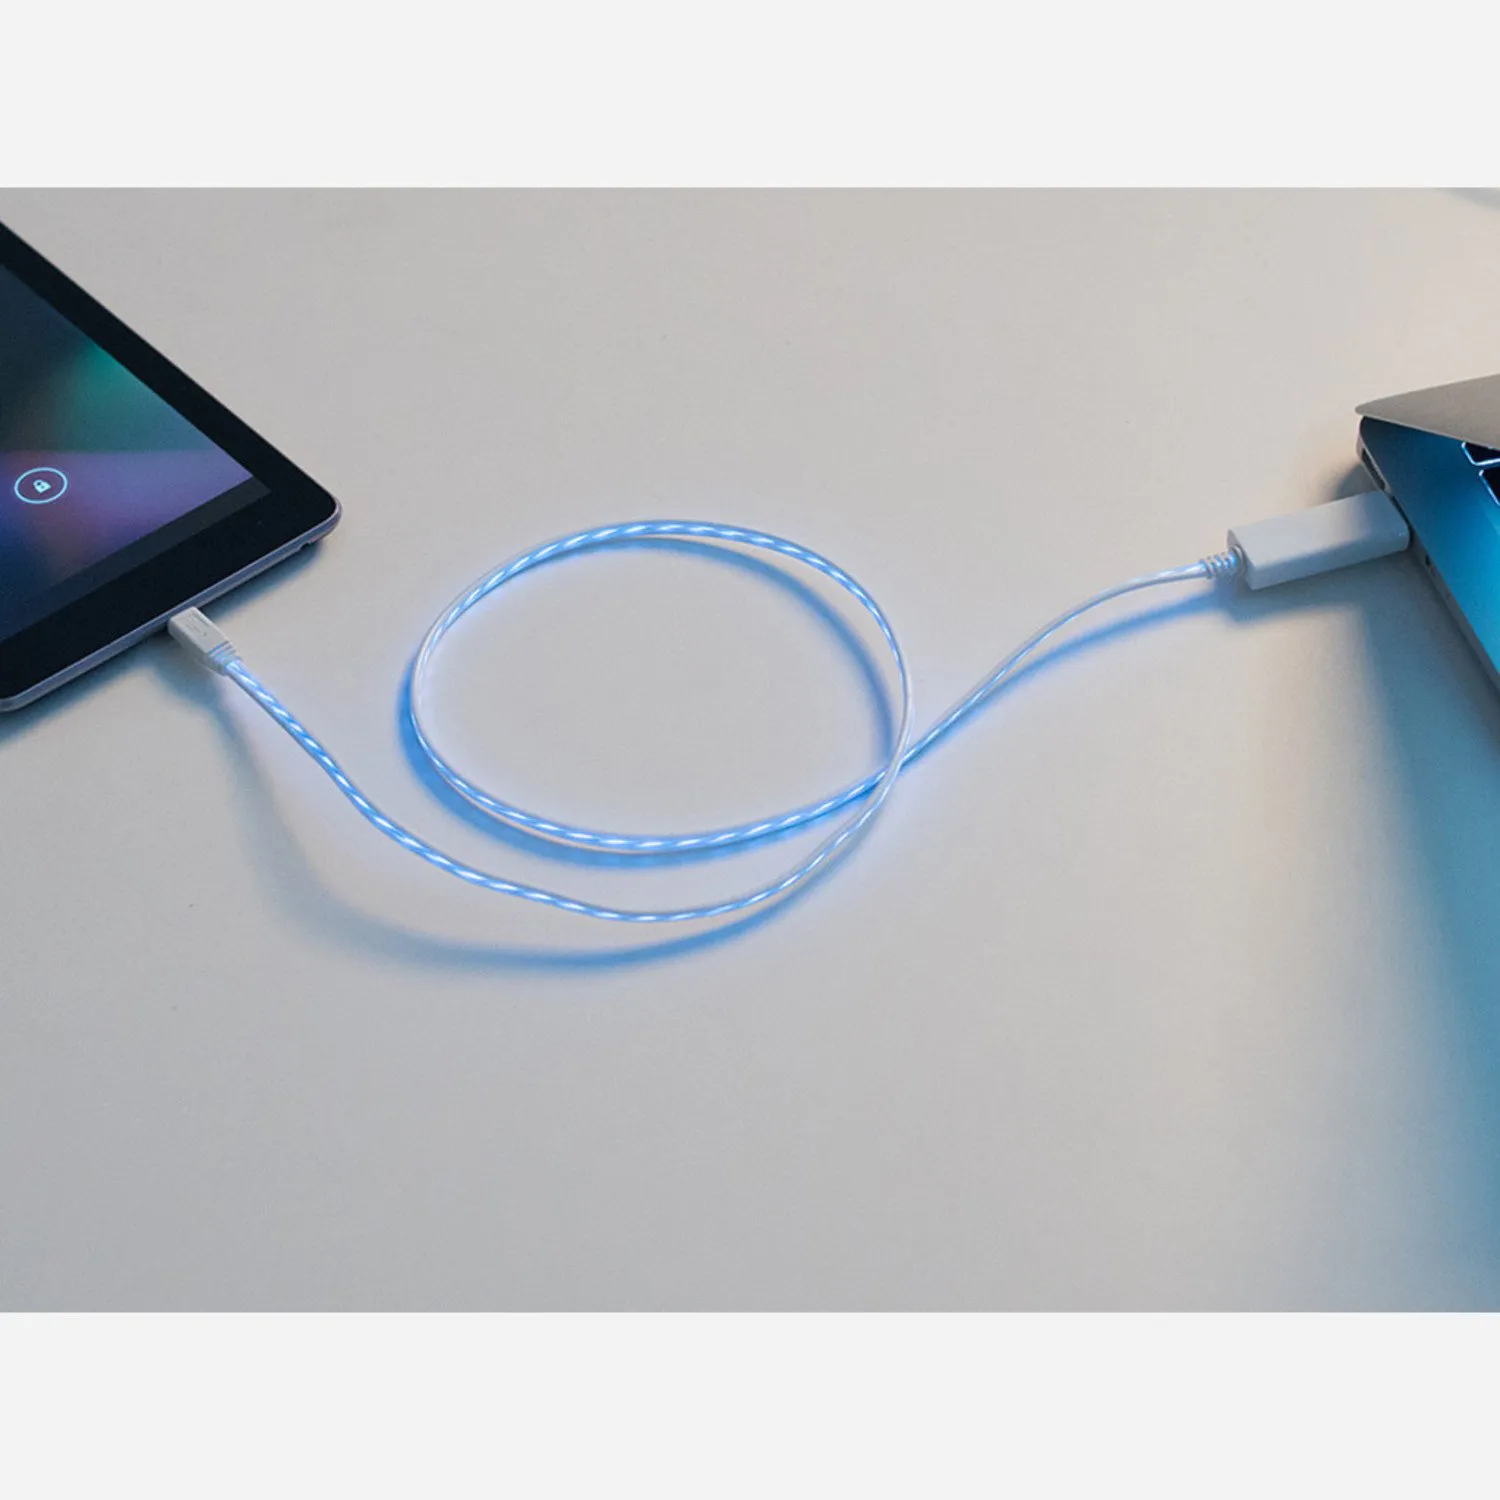 Photo of Flowing Effect MicroUSB Data+Charging Cable - White w/Aqua EL